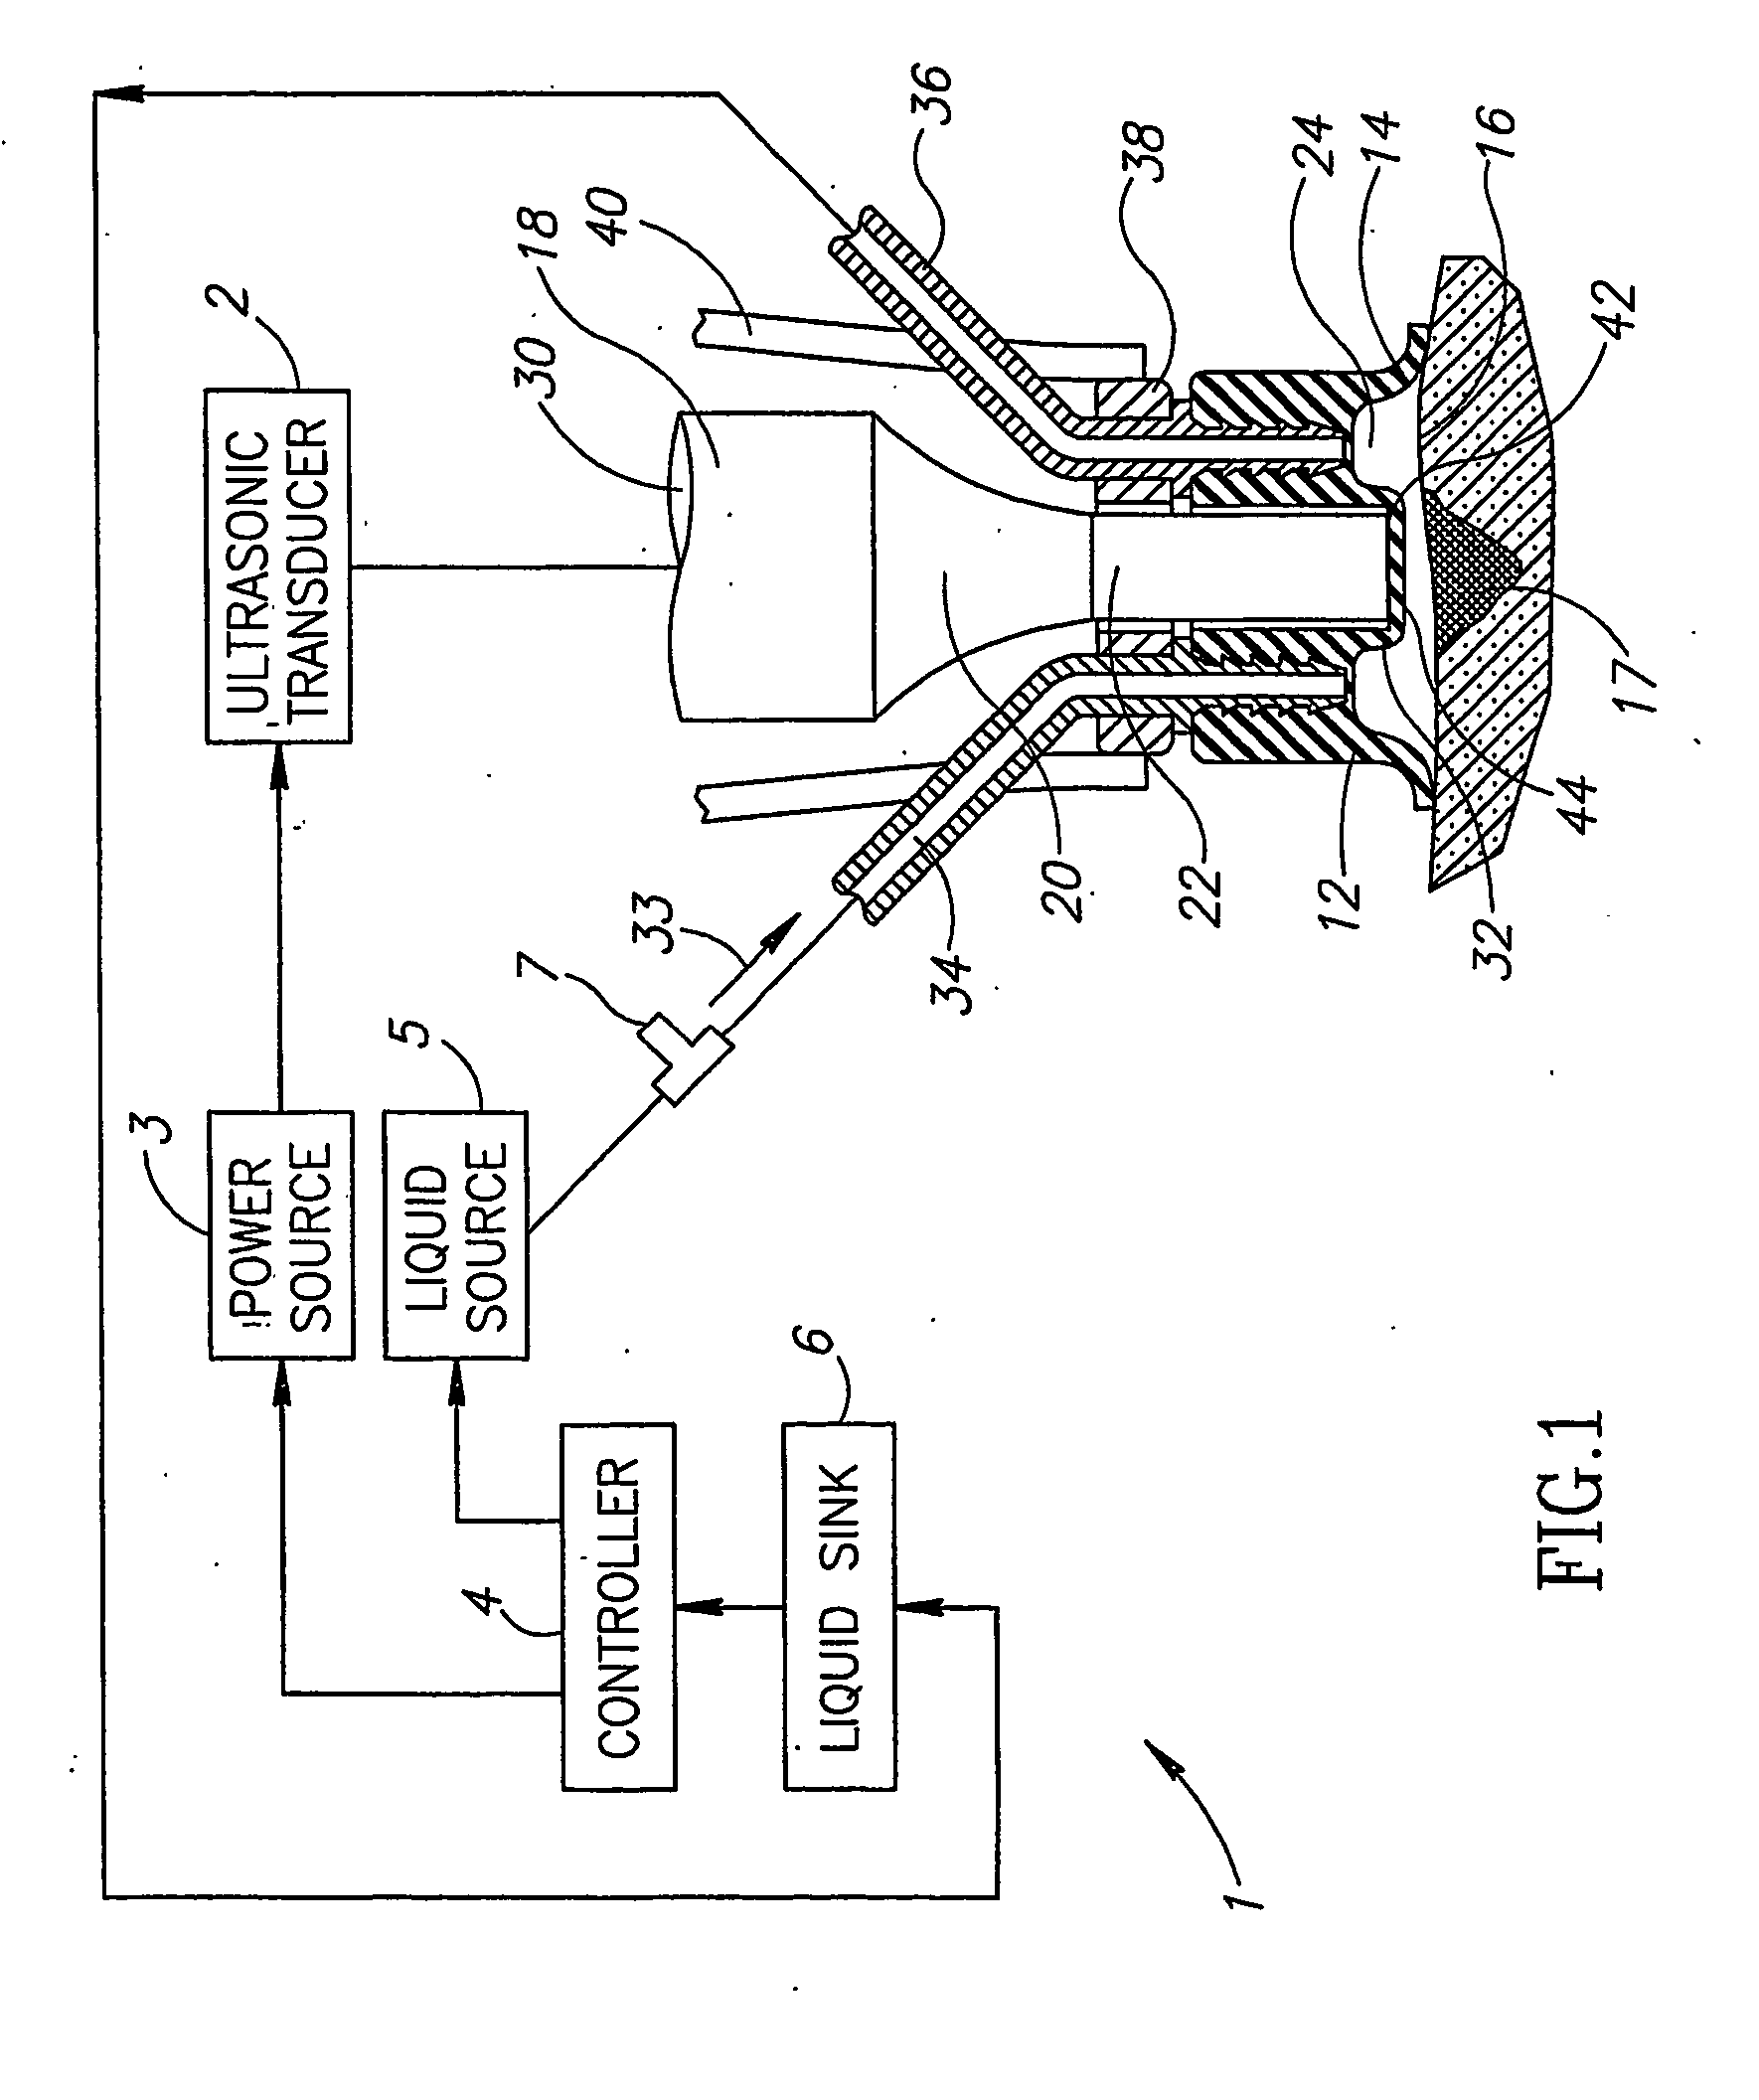 Apparatus and method for treatment of damaged tissue